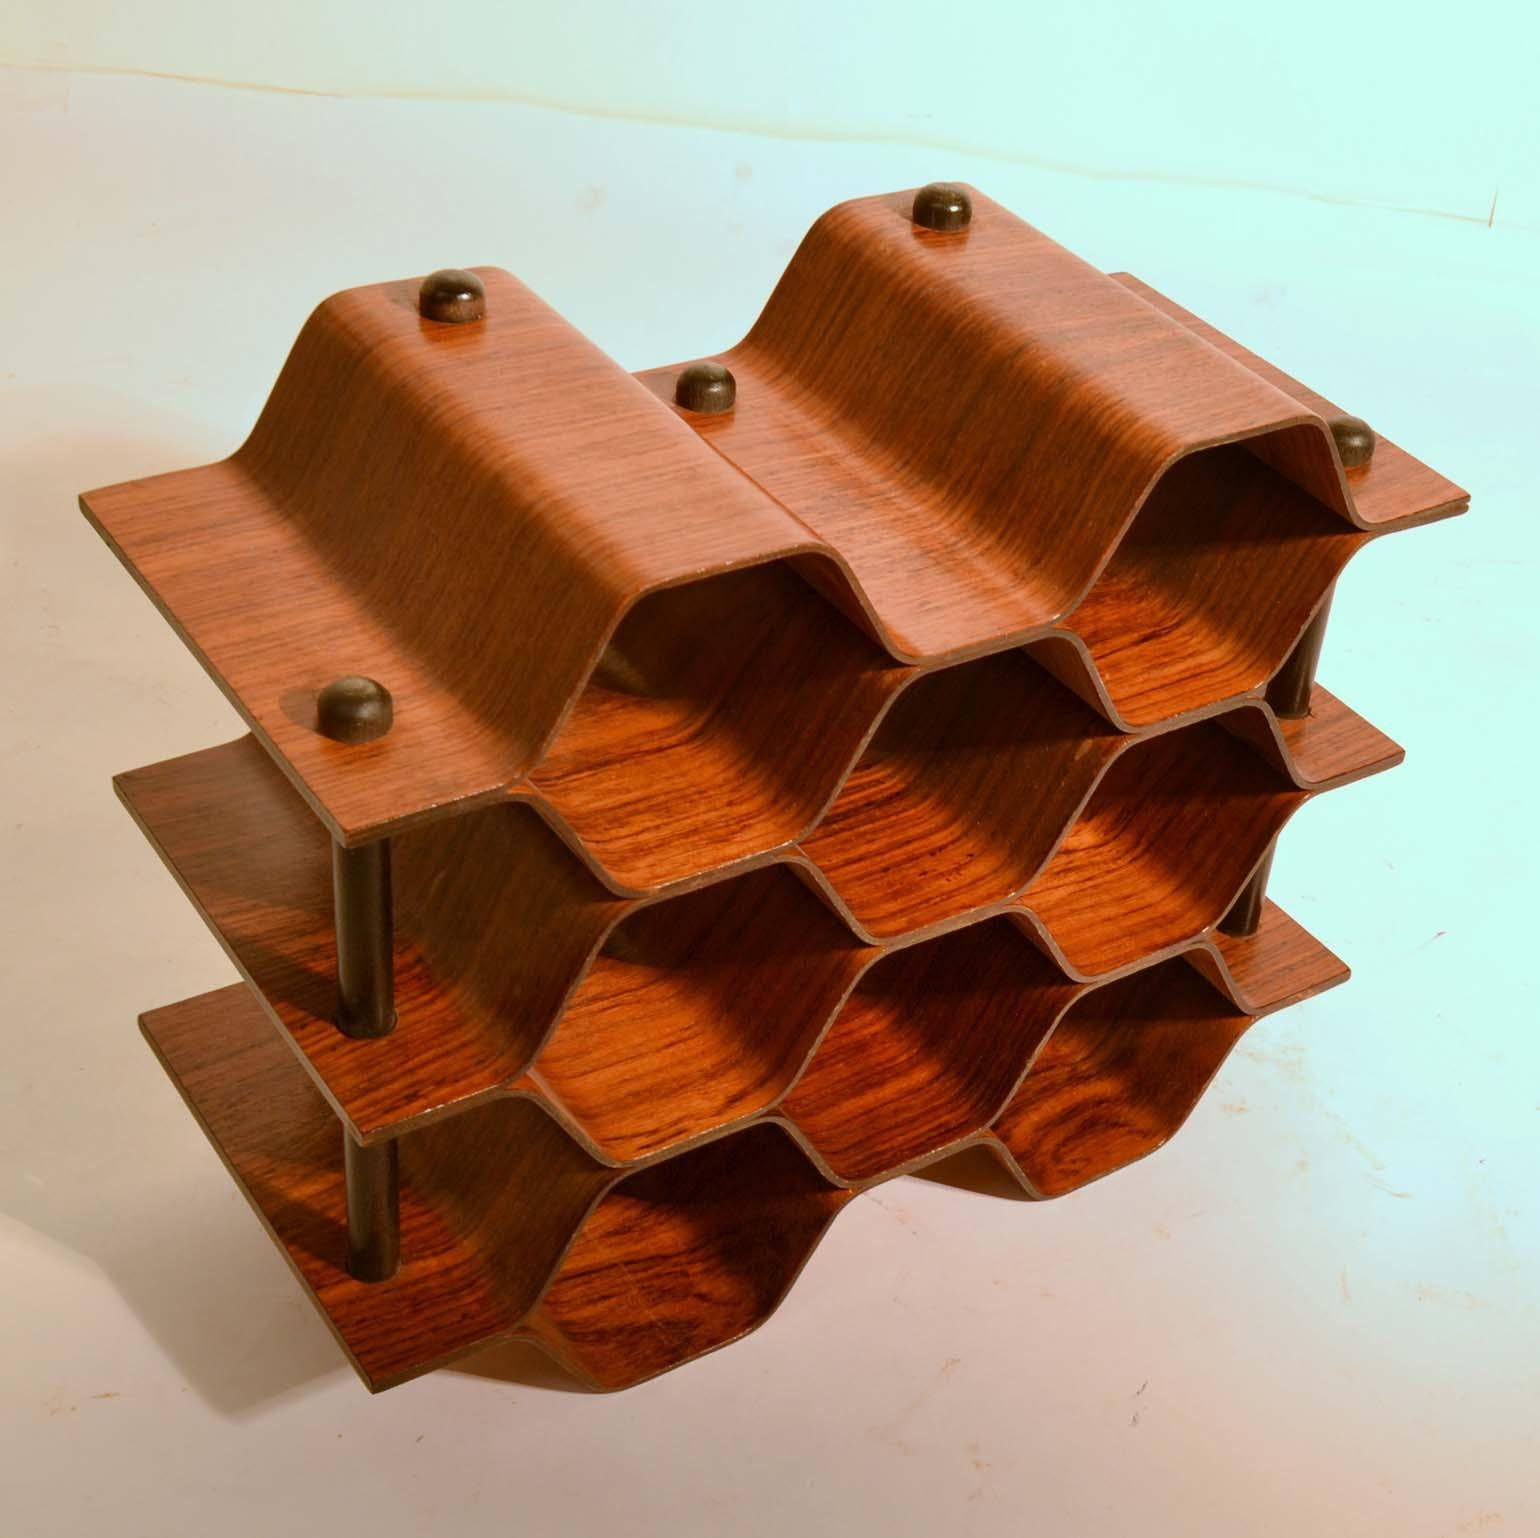 Sculptural wine rack / bottle stand designed by Torsten Johansson. Produced by AB Formträ in Sweden in the shape of a honeycomb, holding up to eight wine bottles. The rack is made of bent ply palisander with black vertical supports. This highly